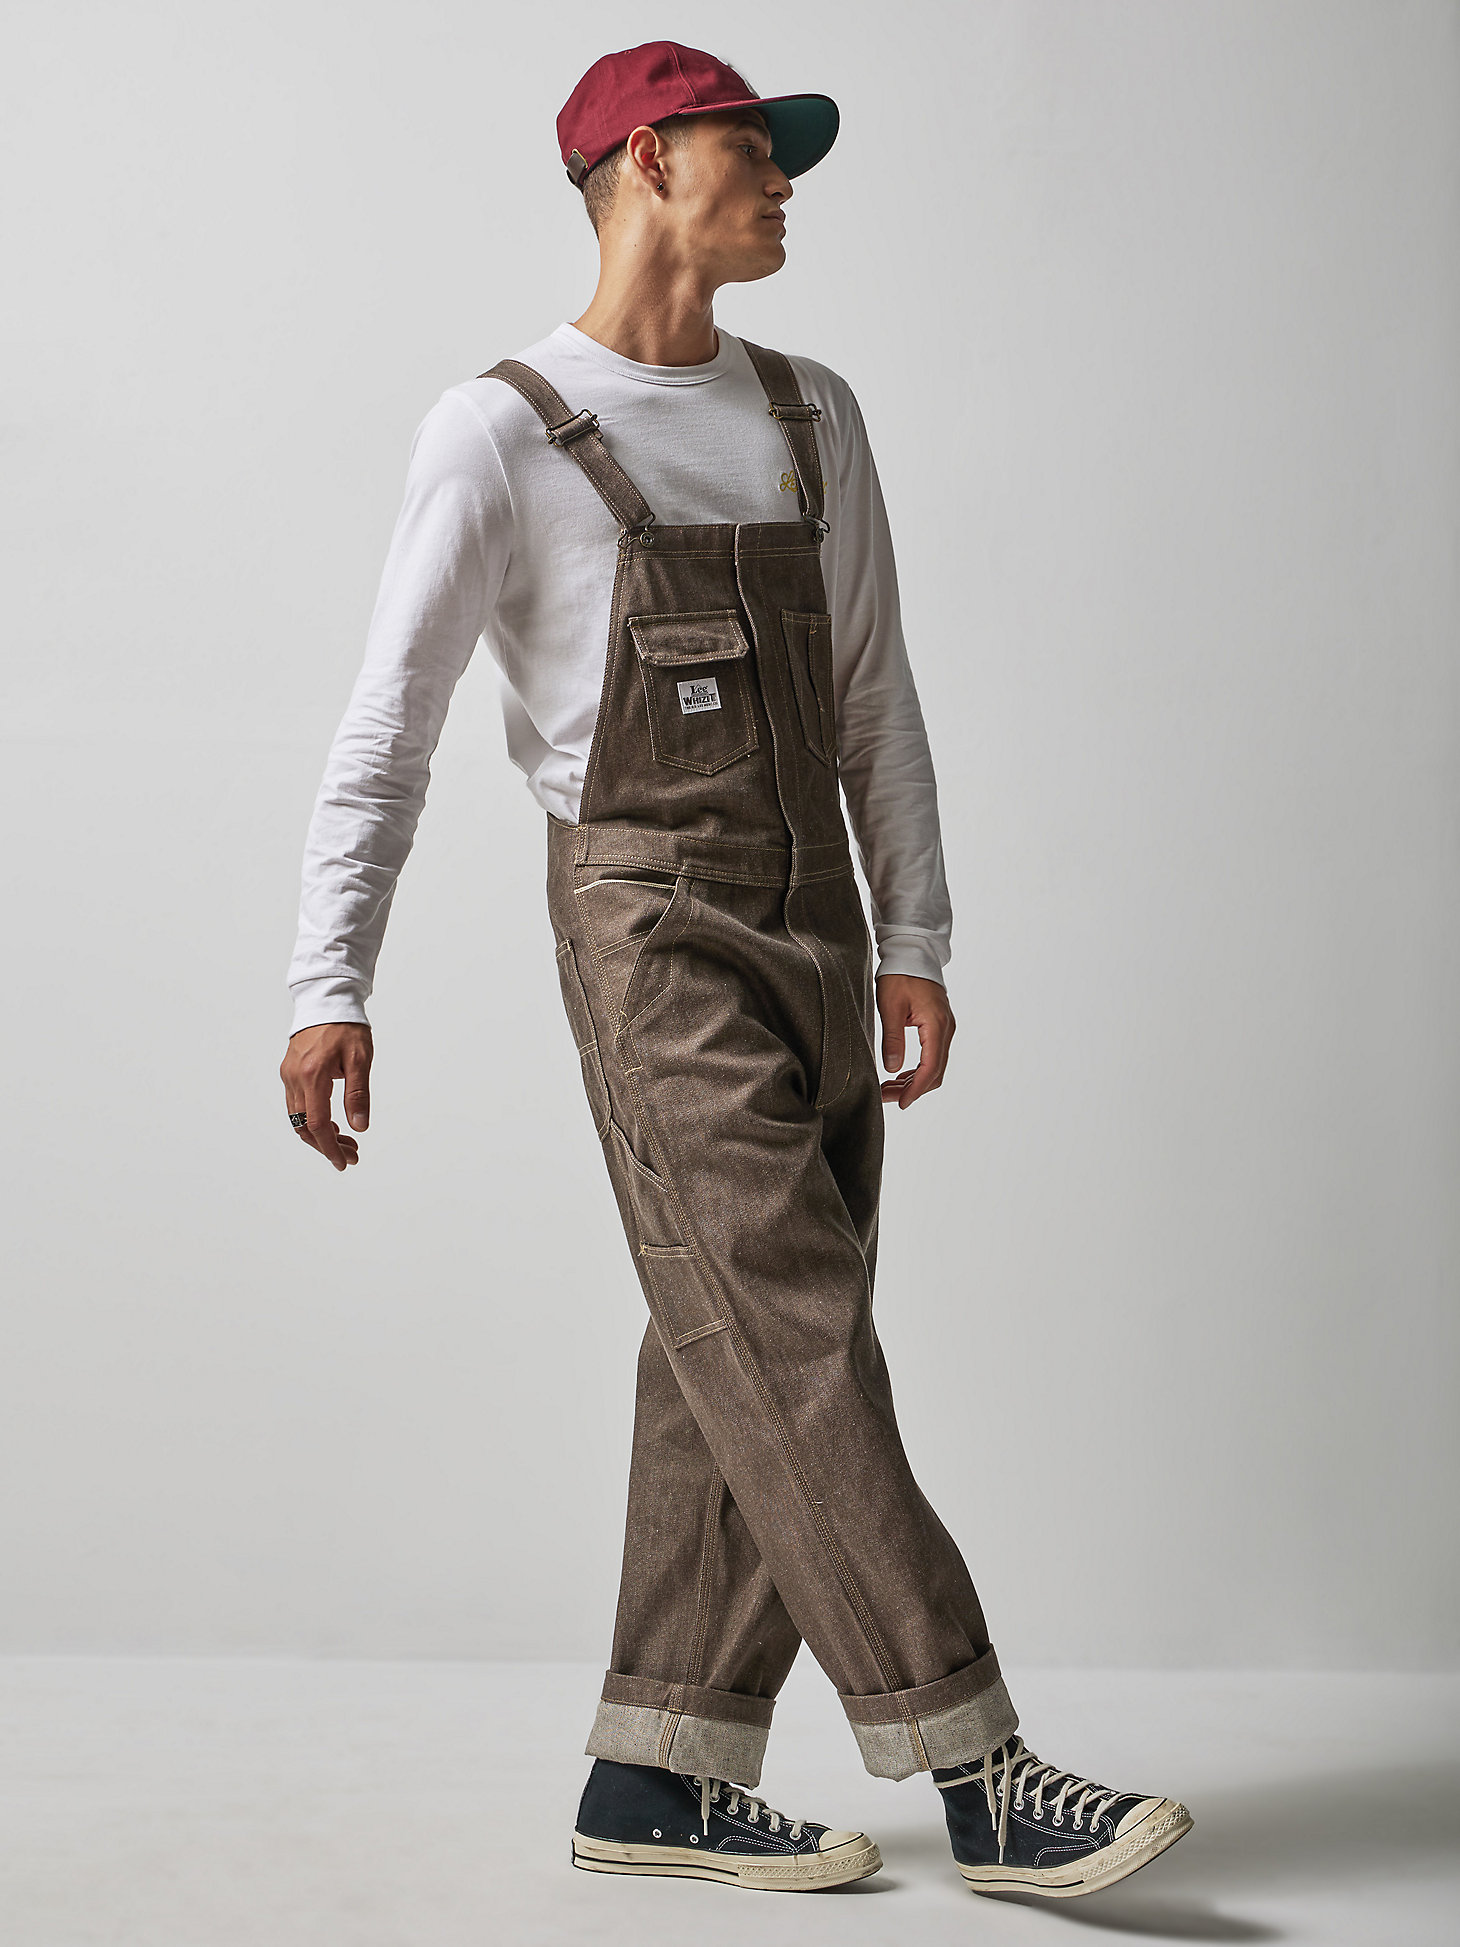 Men's Lee® x The Brooklyn Circus® Whizit Zip Overall in Brown Selvedge alternative view 8